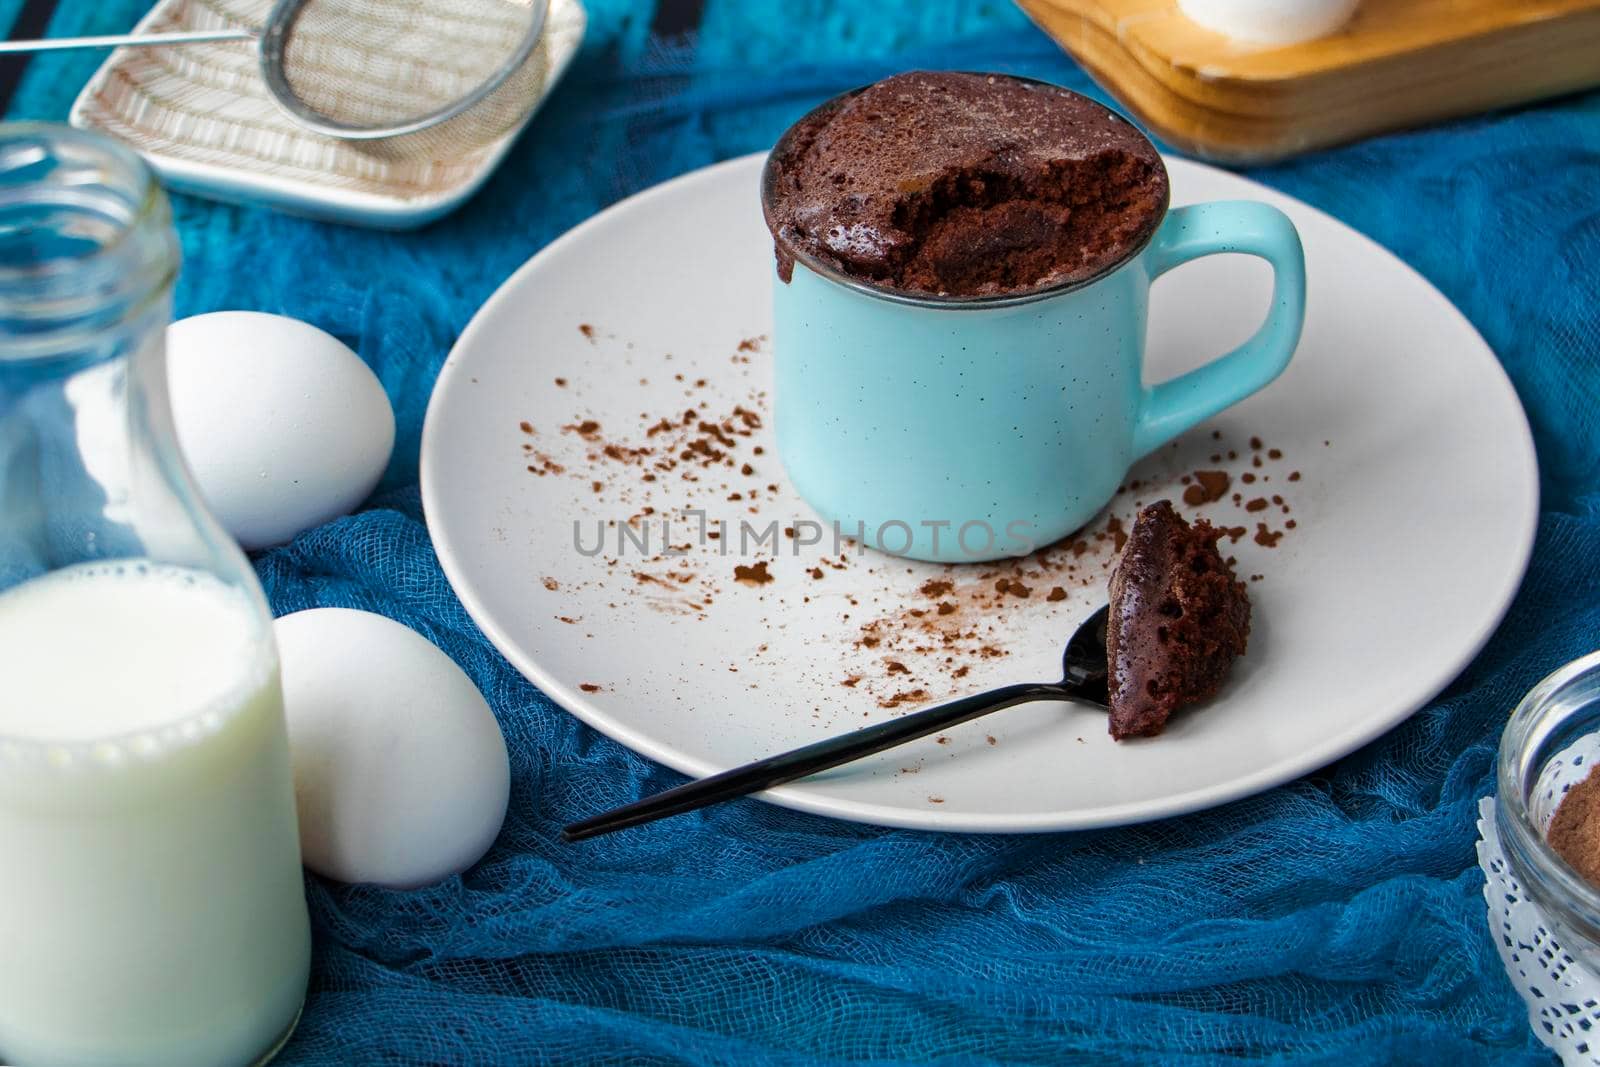 mugcake is microwaved. Homemade cupcake in a mug is on a plate. Chocolate brownie mug cake. Easy cooking concept, microwave baking. muffin chocolate. ingredients, eggs, milk, cocoa.